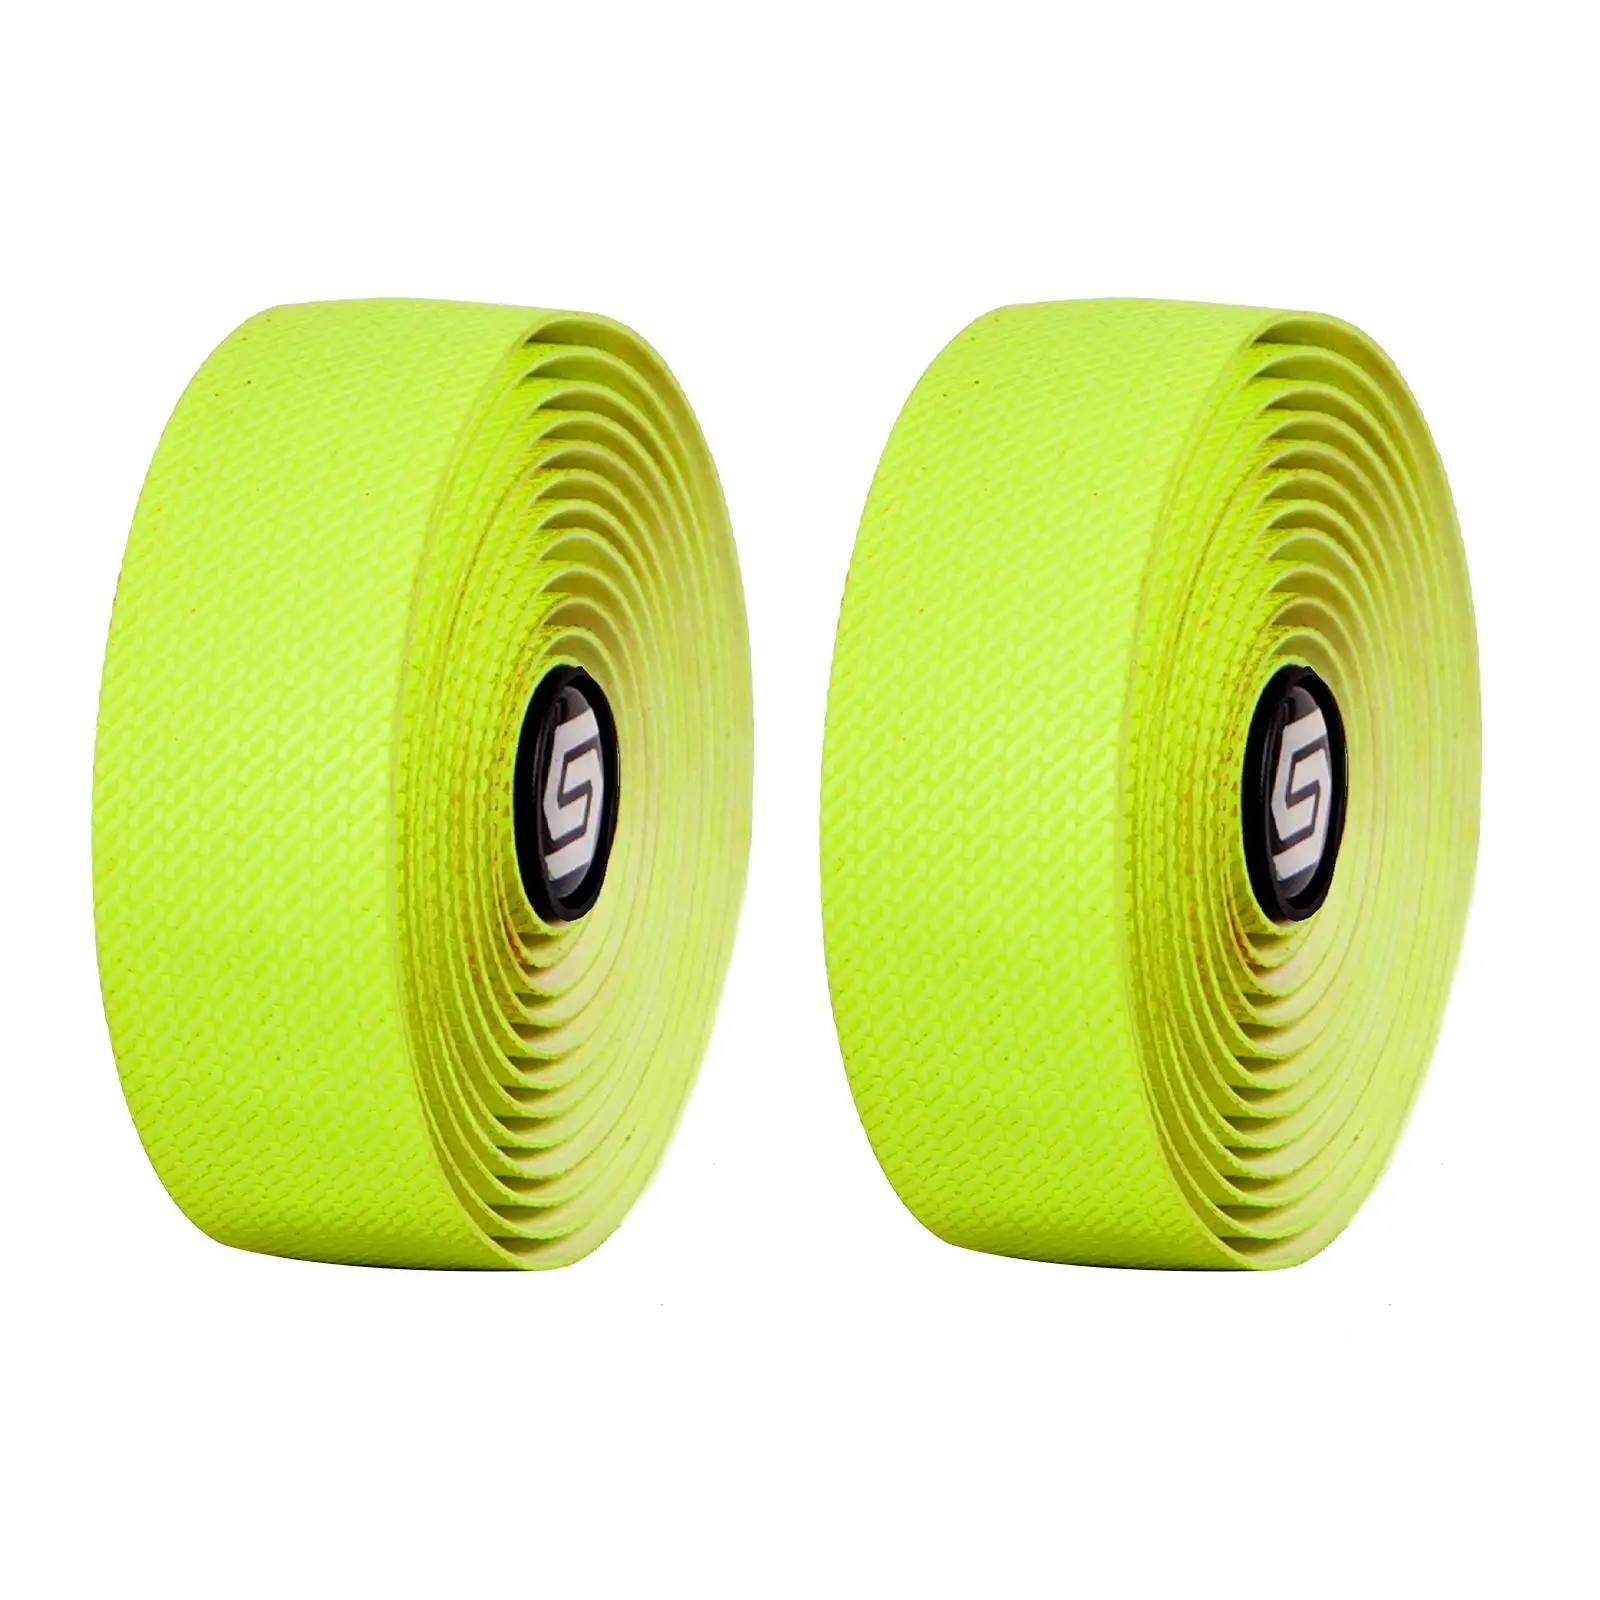 EVA Road Bike Handlebar Tapes Cycling Handle Wraps Shock Absorption Anti Vibration Soft with Bar End Plug Accessories